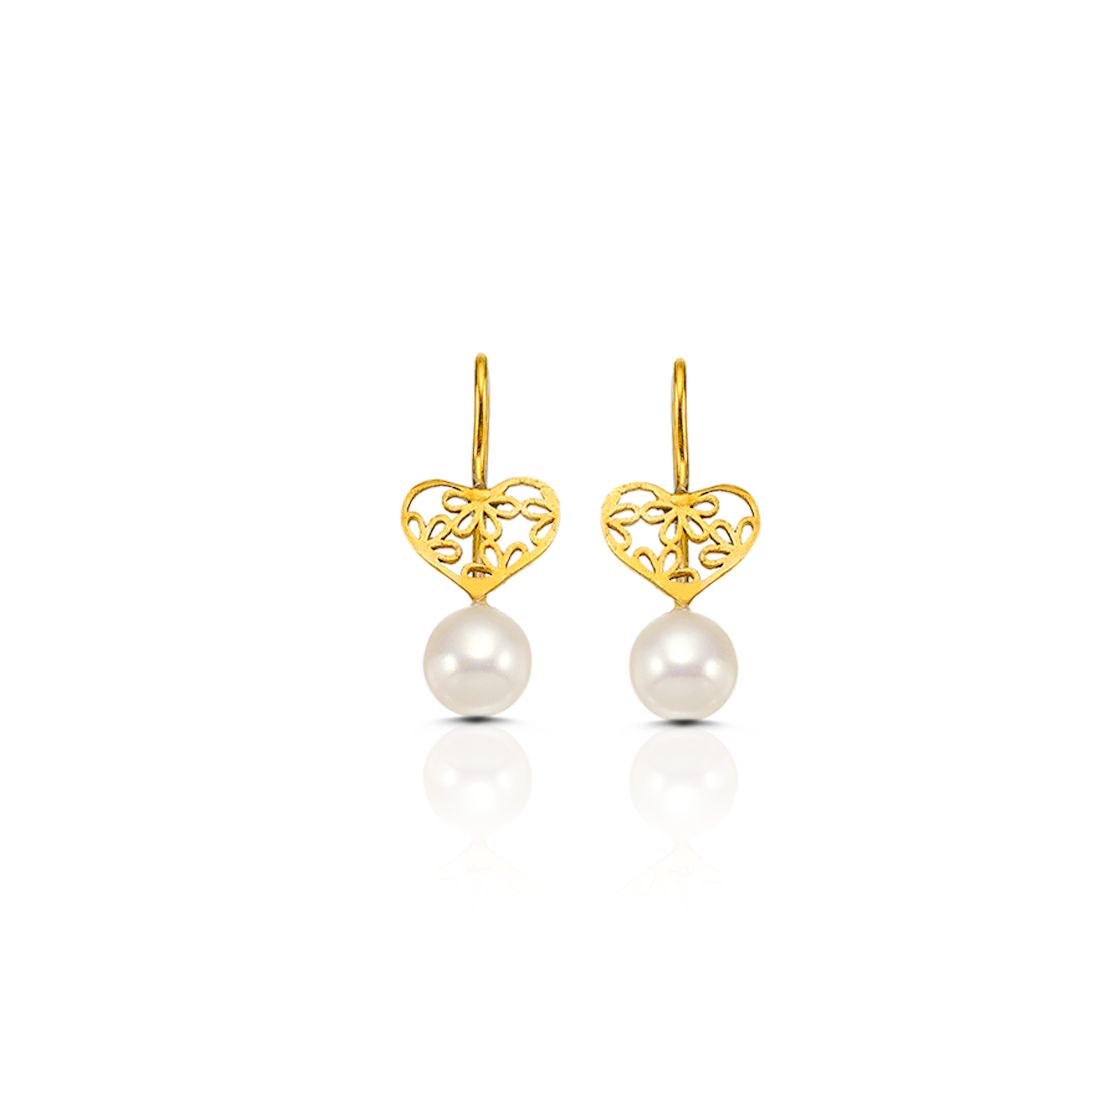 Gold lace heart dangle earrings complemented with a classic pearl.